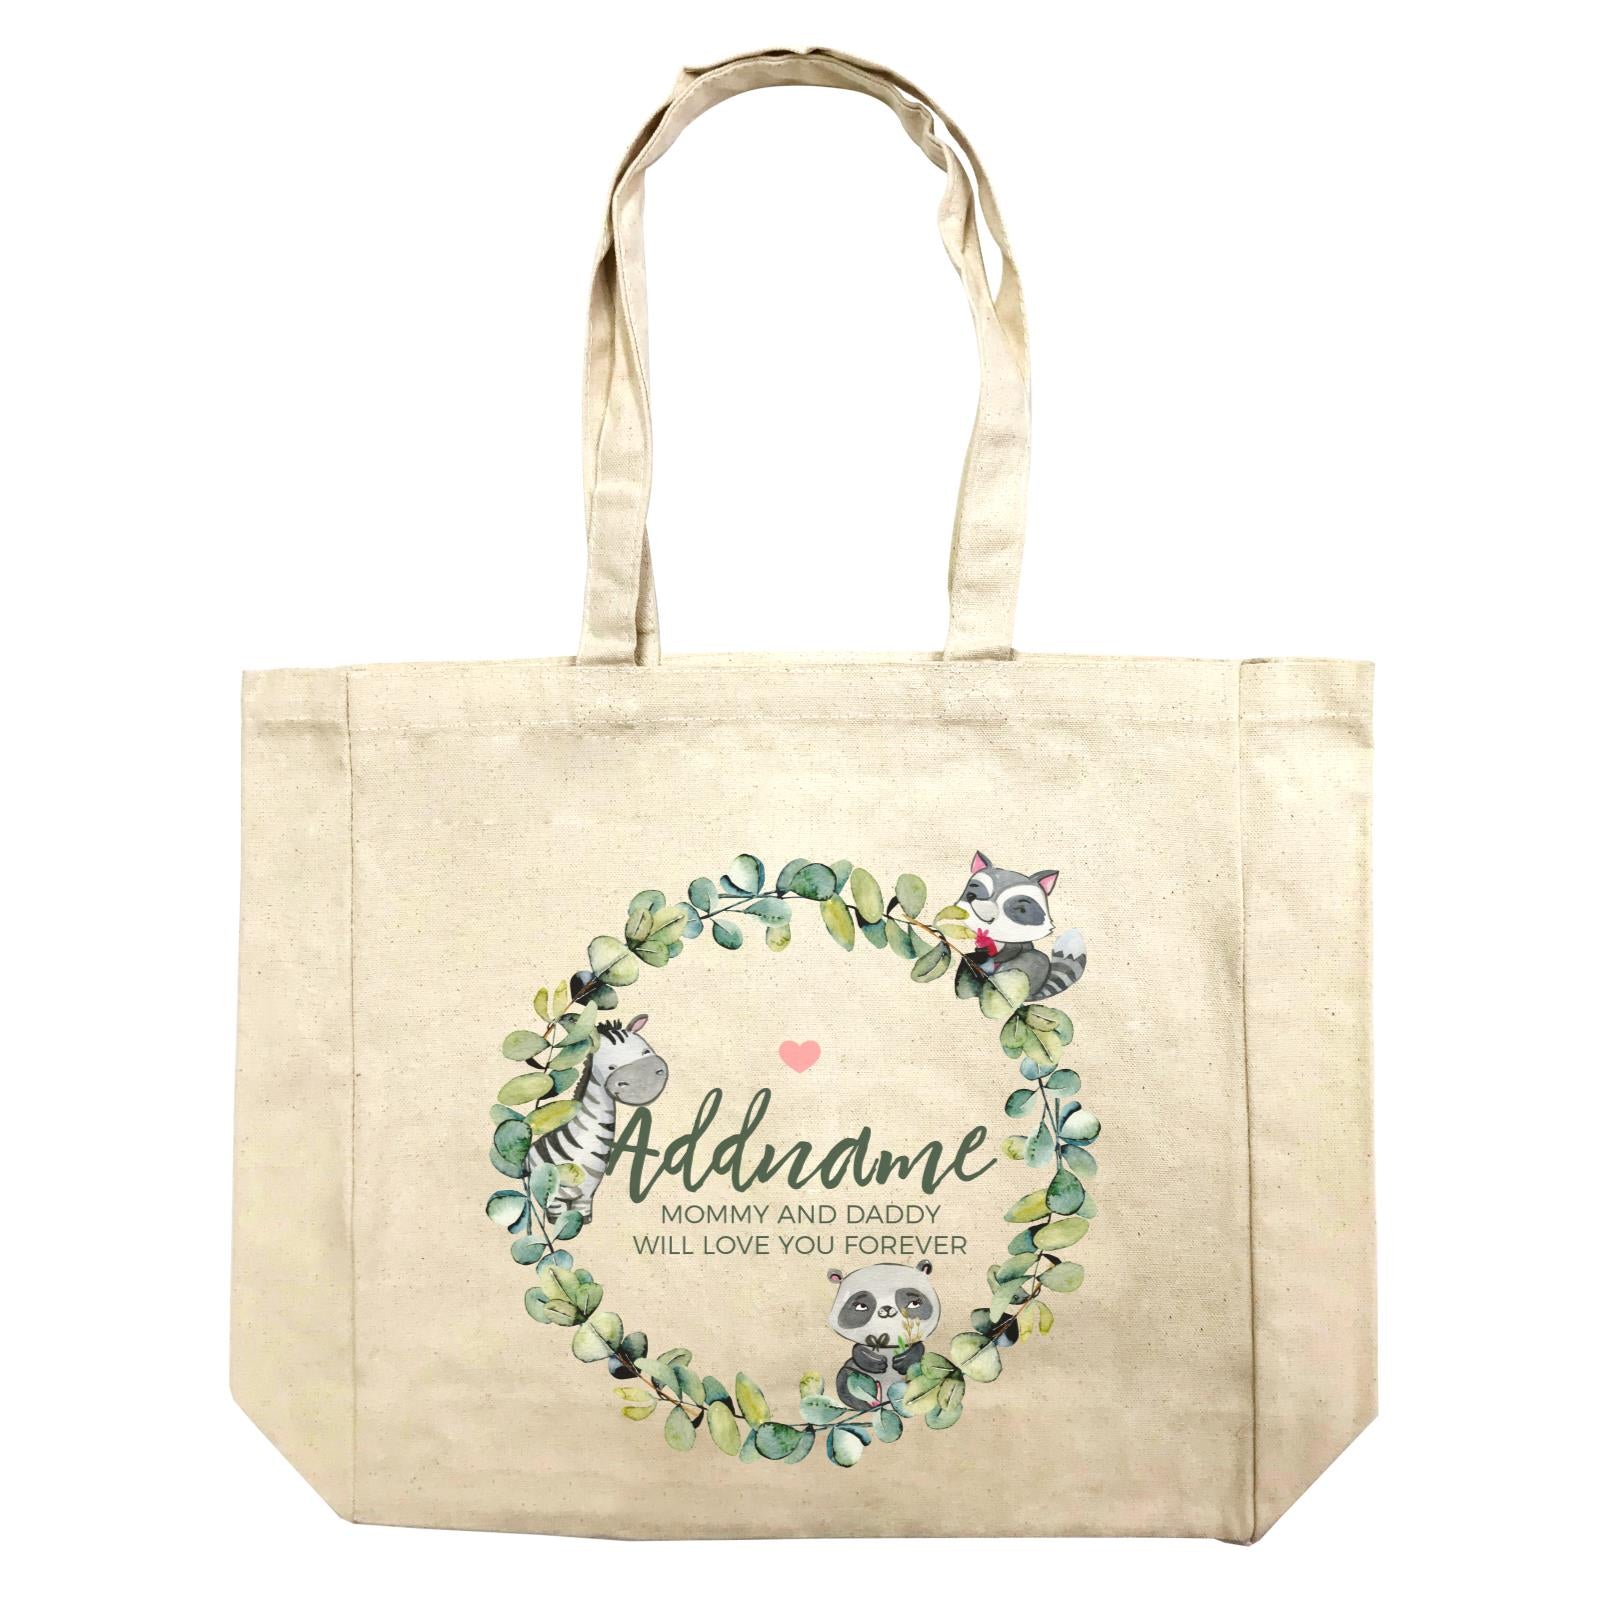 Watercolour Panda Zebra and Racoon Leaf Wreath Personalizable with Name and Text Shopping Bag